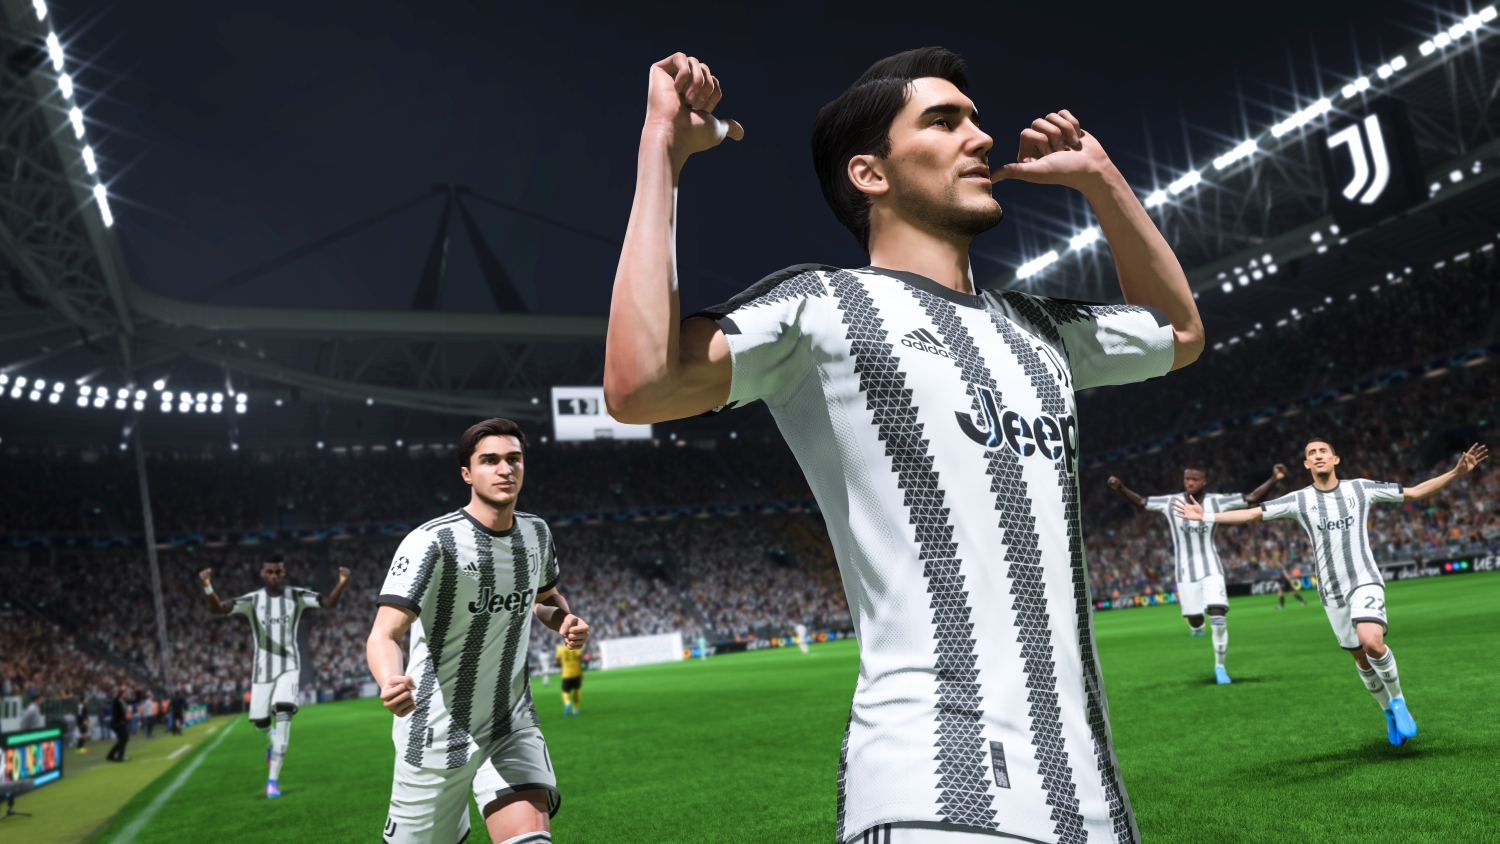 Fifa 23 Beginners Guide Tips And Tricks To Level Up Your Skills Digital Trends